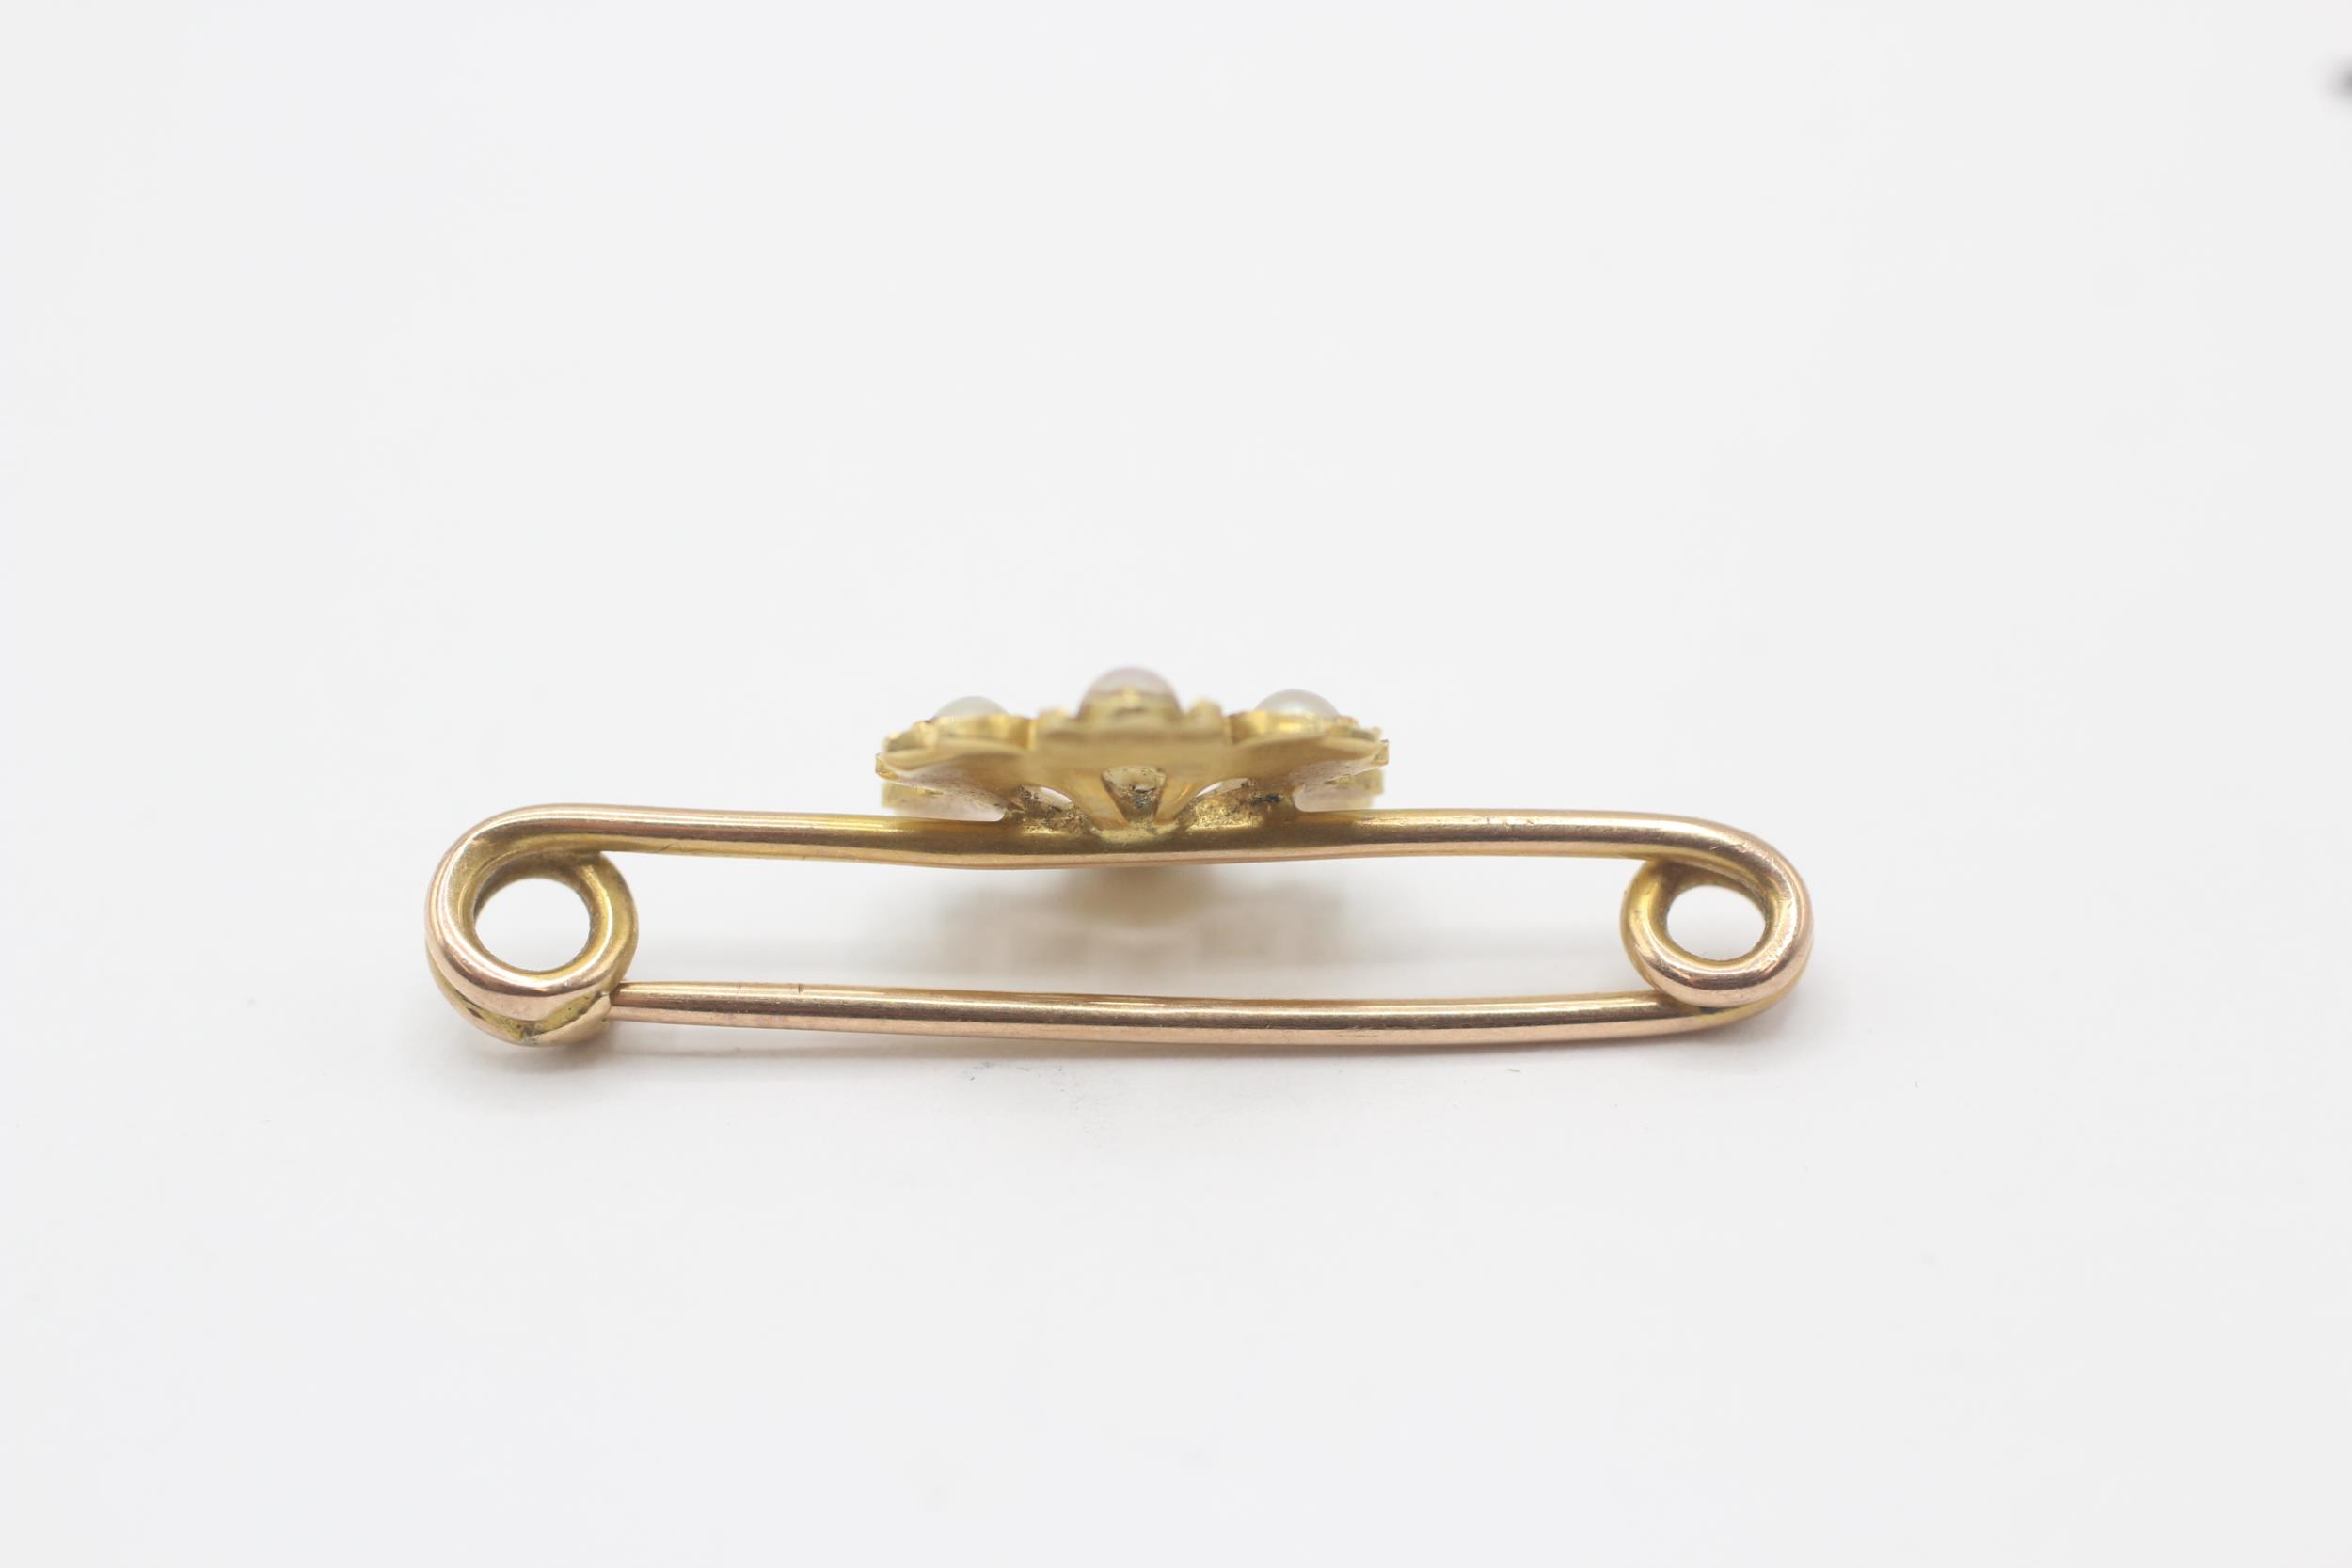 15ct gold antique seed pearl floral bar brooch with 9ct pin 1.6 g - Image 4 of 5